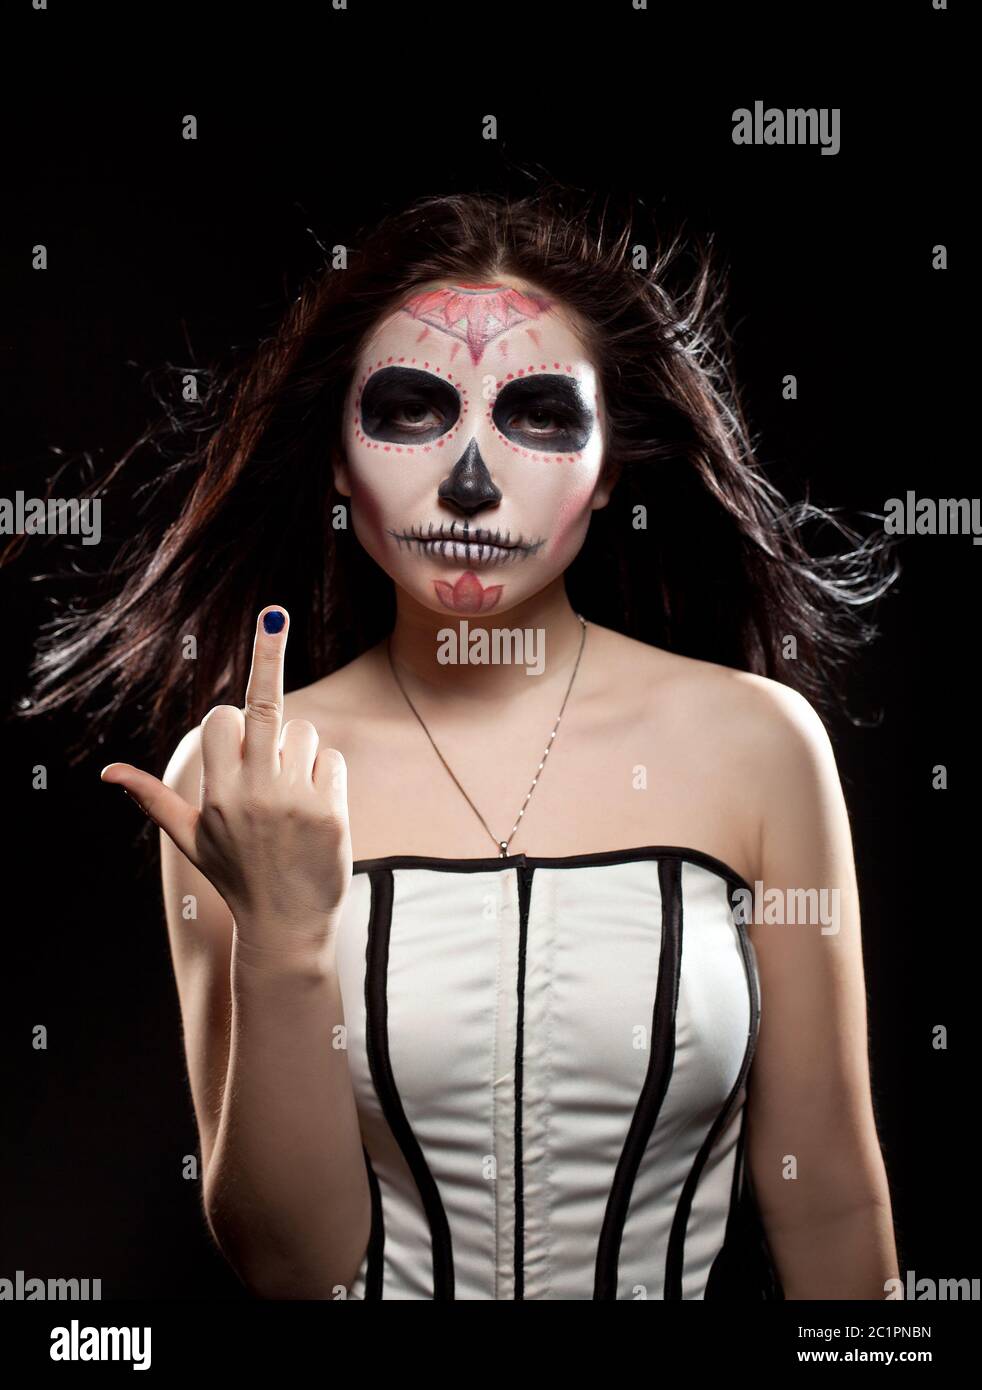 Young woman in day of the dead mask skull face art Stock Photo